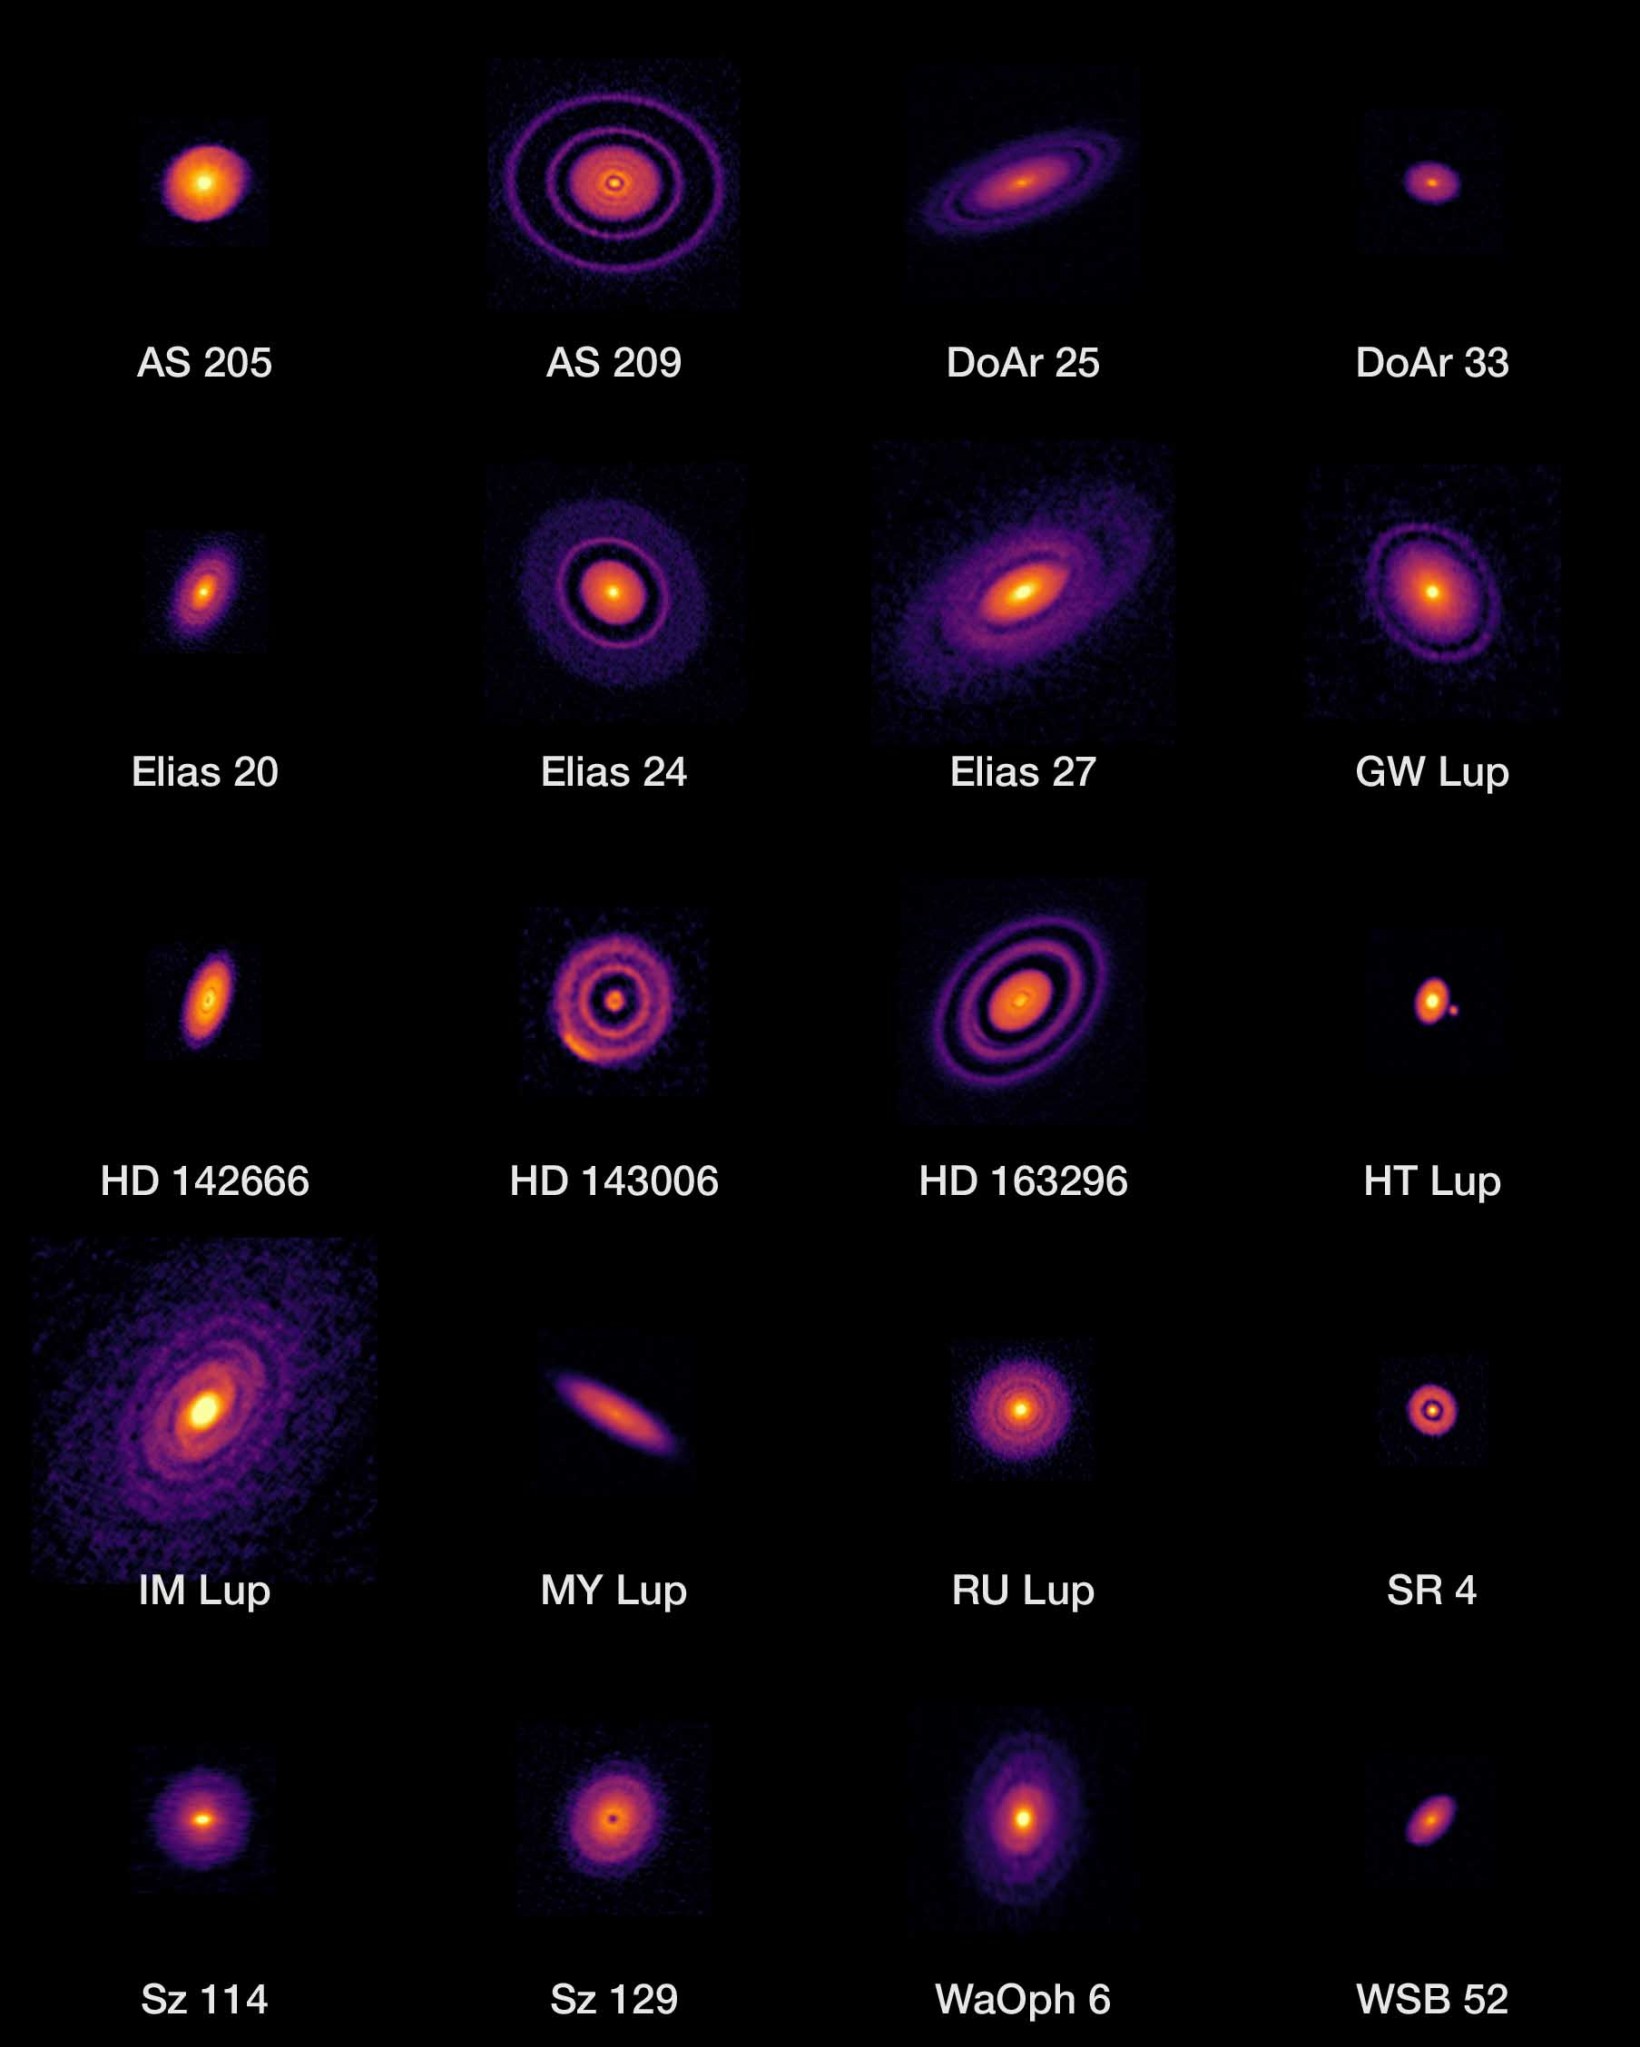 The researchers will use NASA’s Webb Telescope to survey 17 of the 20 nearby protoplanetary disks observed by Chile’s Atacama Large Millimeter/submillimeter Array in 2018 for its Disk Substructures at High Angular Resolution Project.